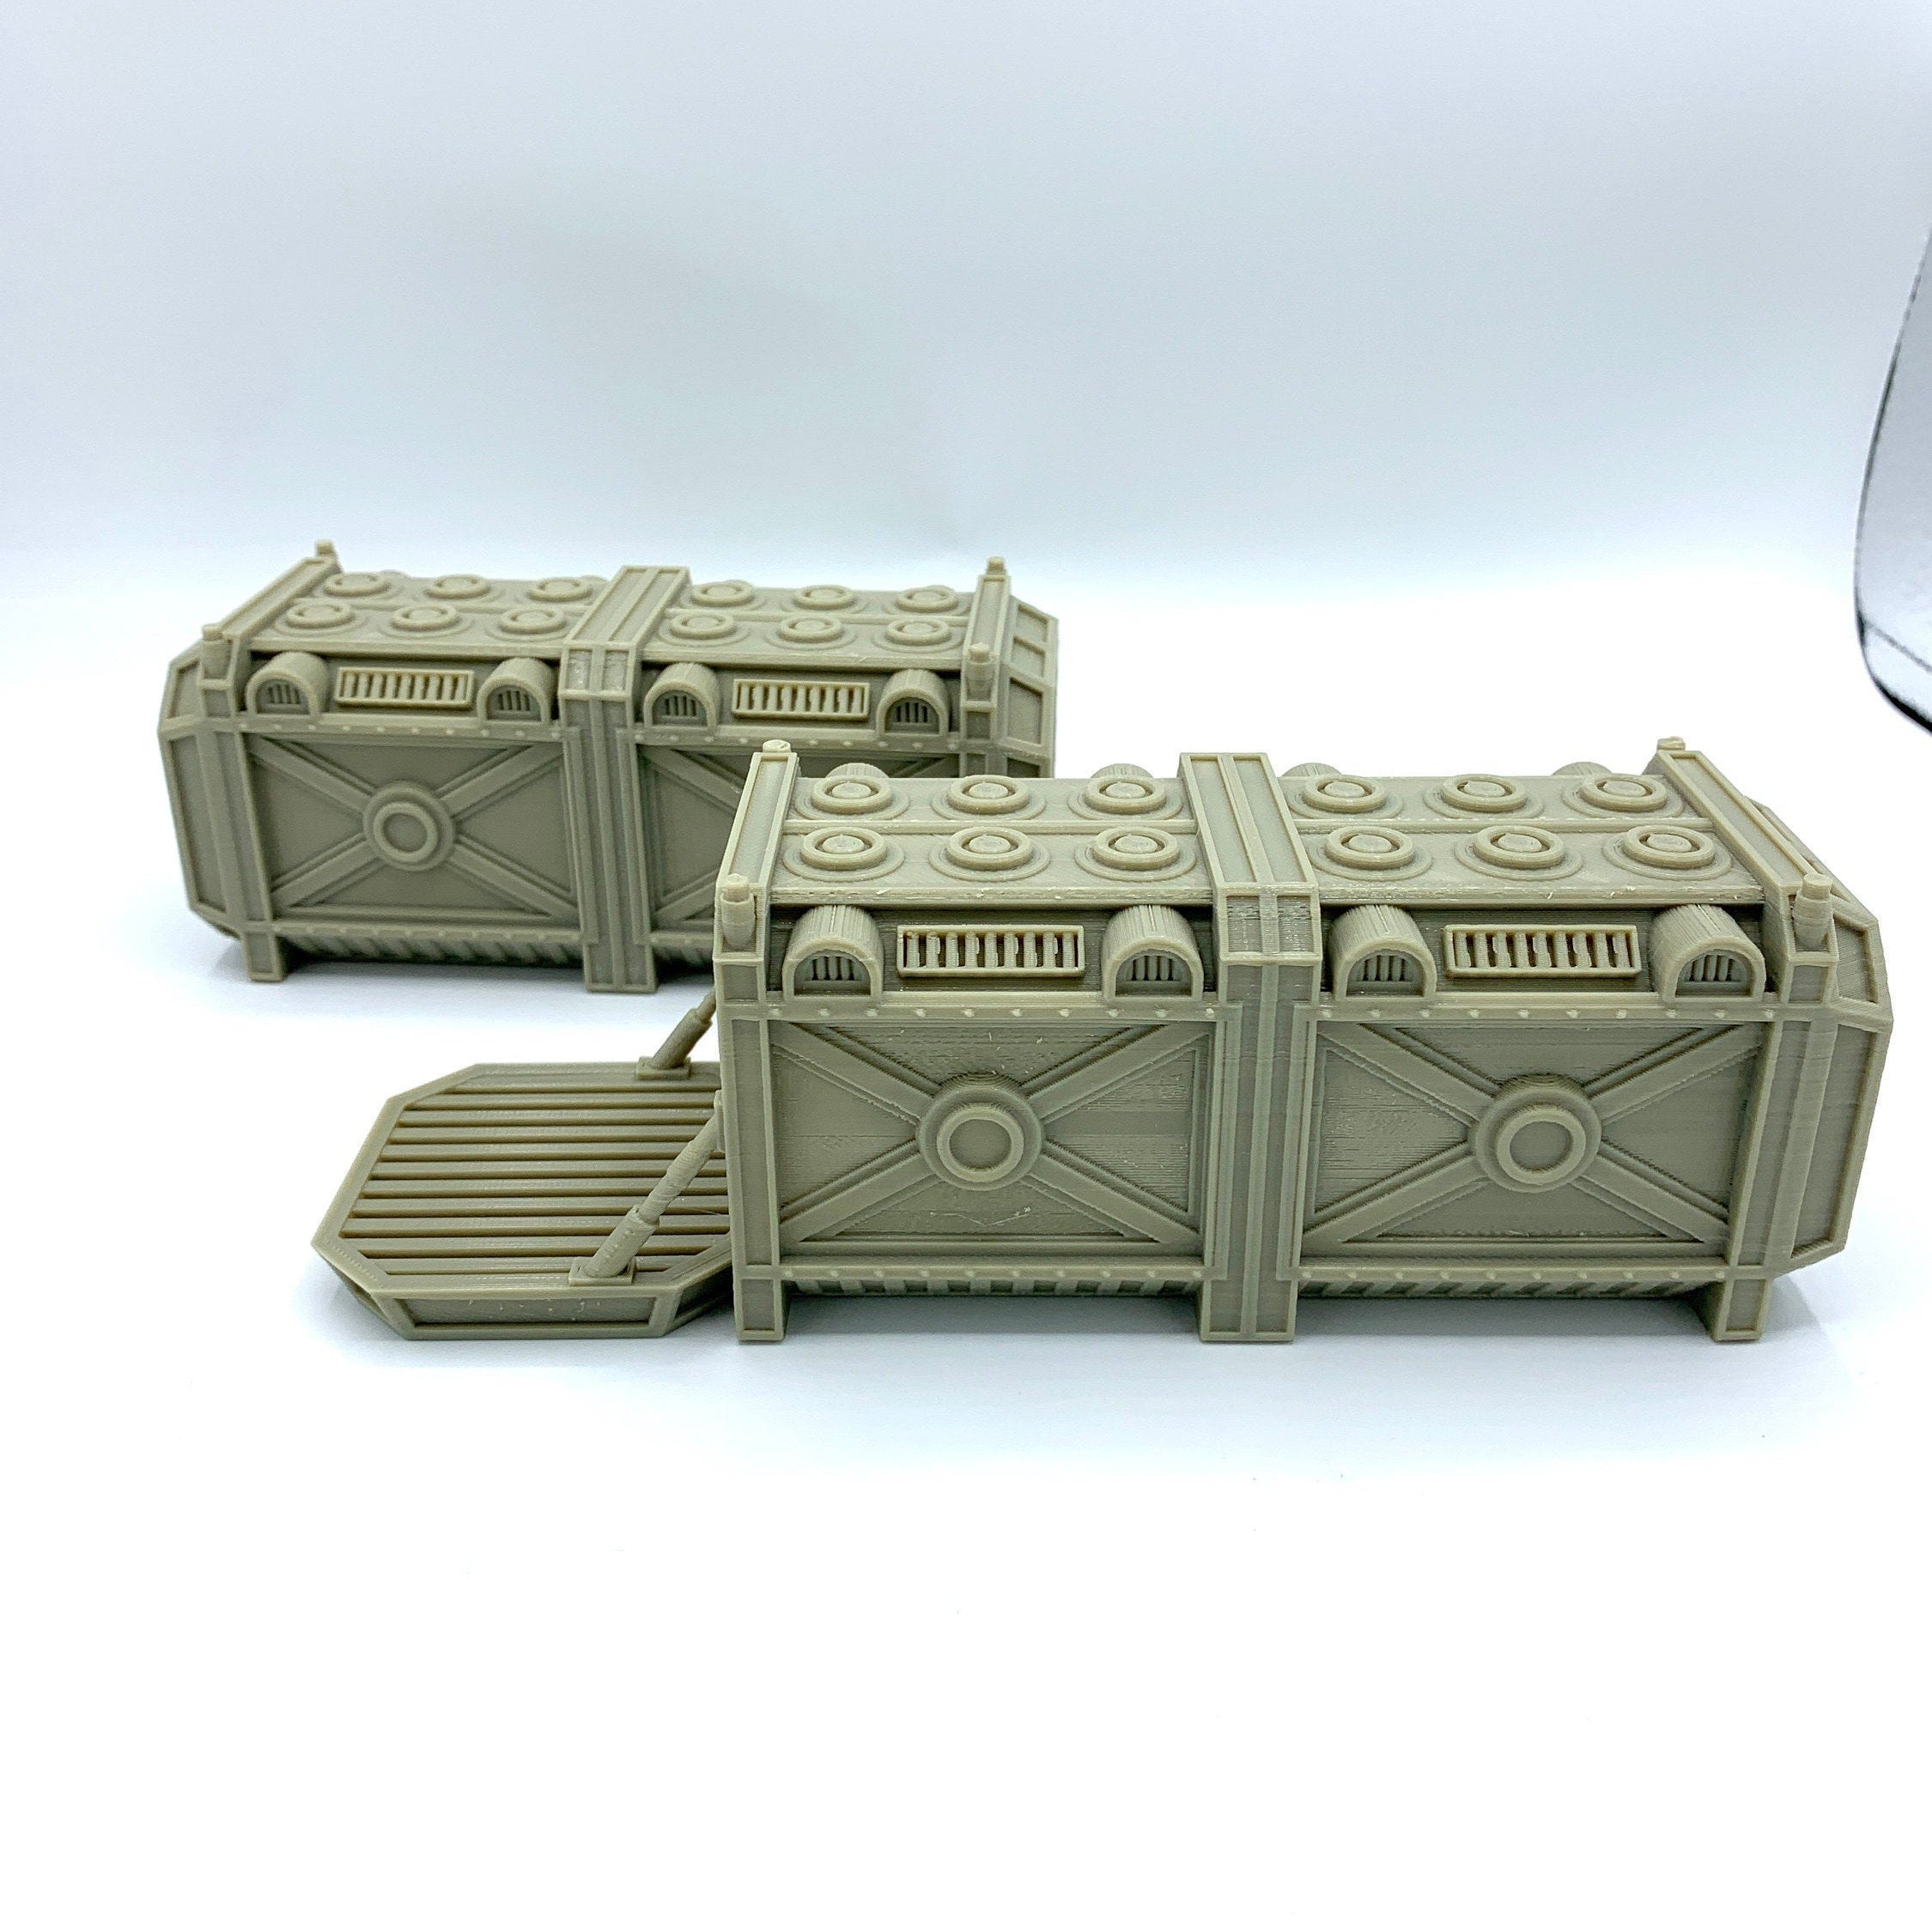 3d Printed / Sci-fi Shipping Containers /Star Wars Legion Compatible Pack/ Corvus Games Terrain Licensed Printer / Print to Order